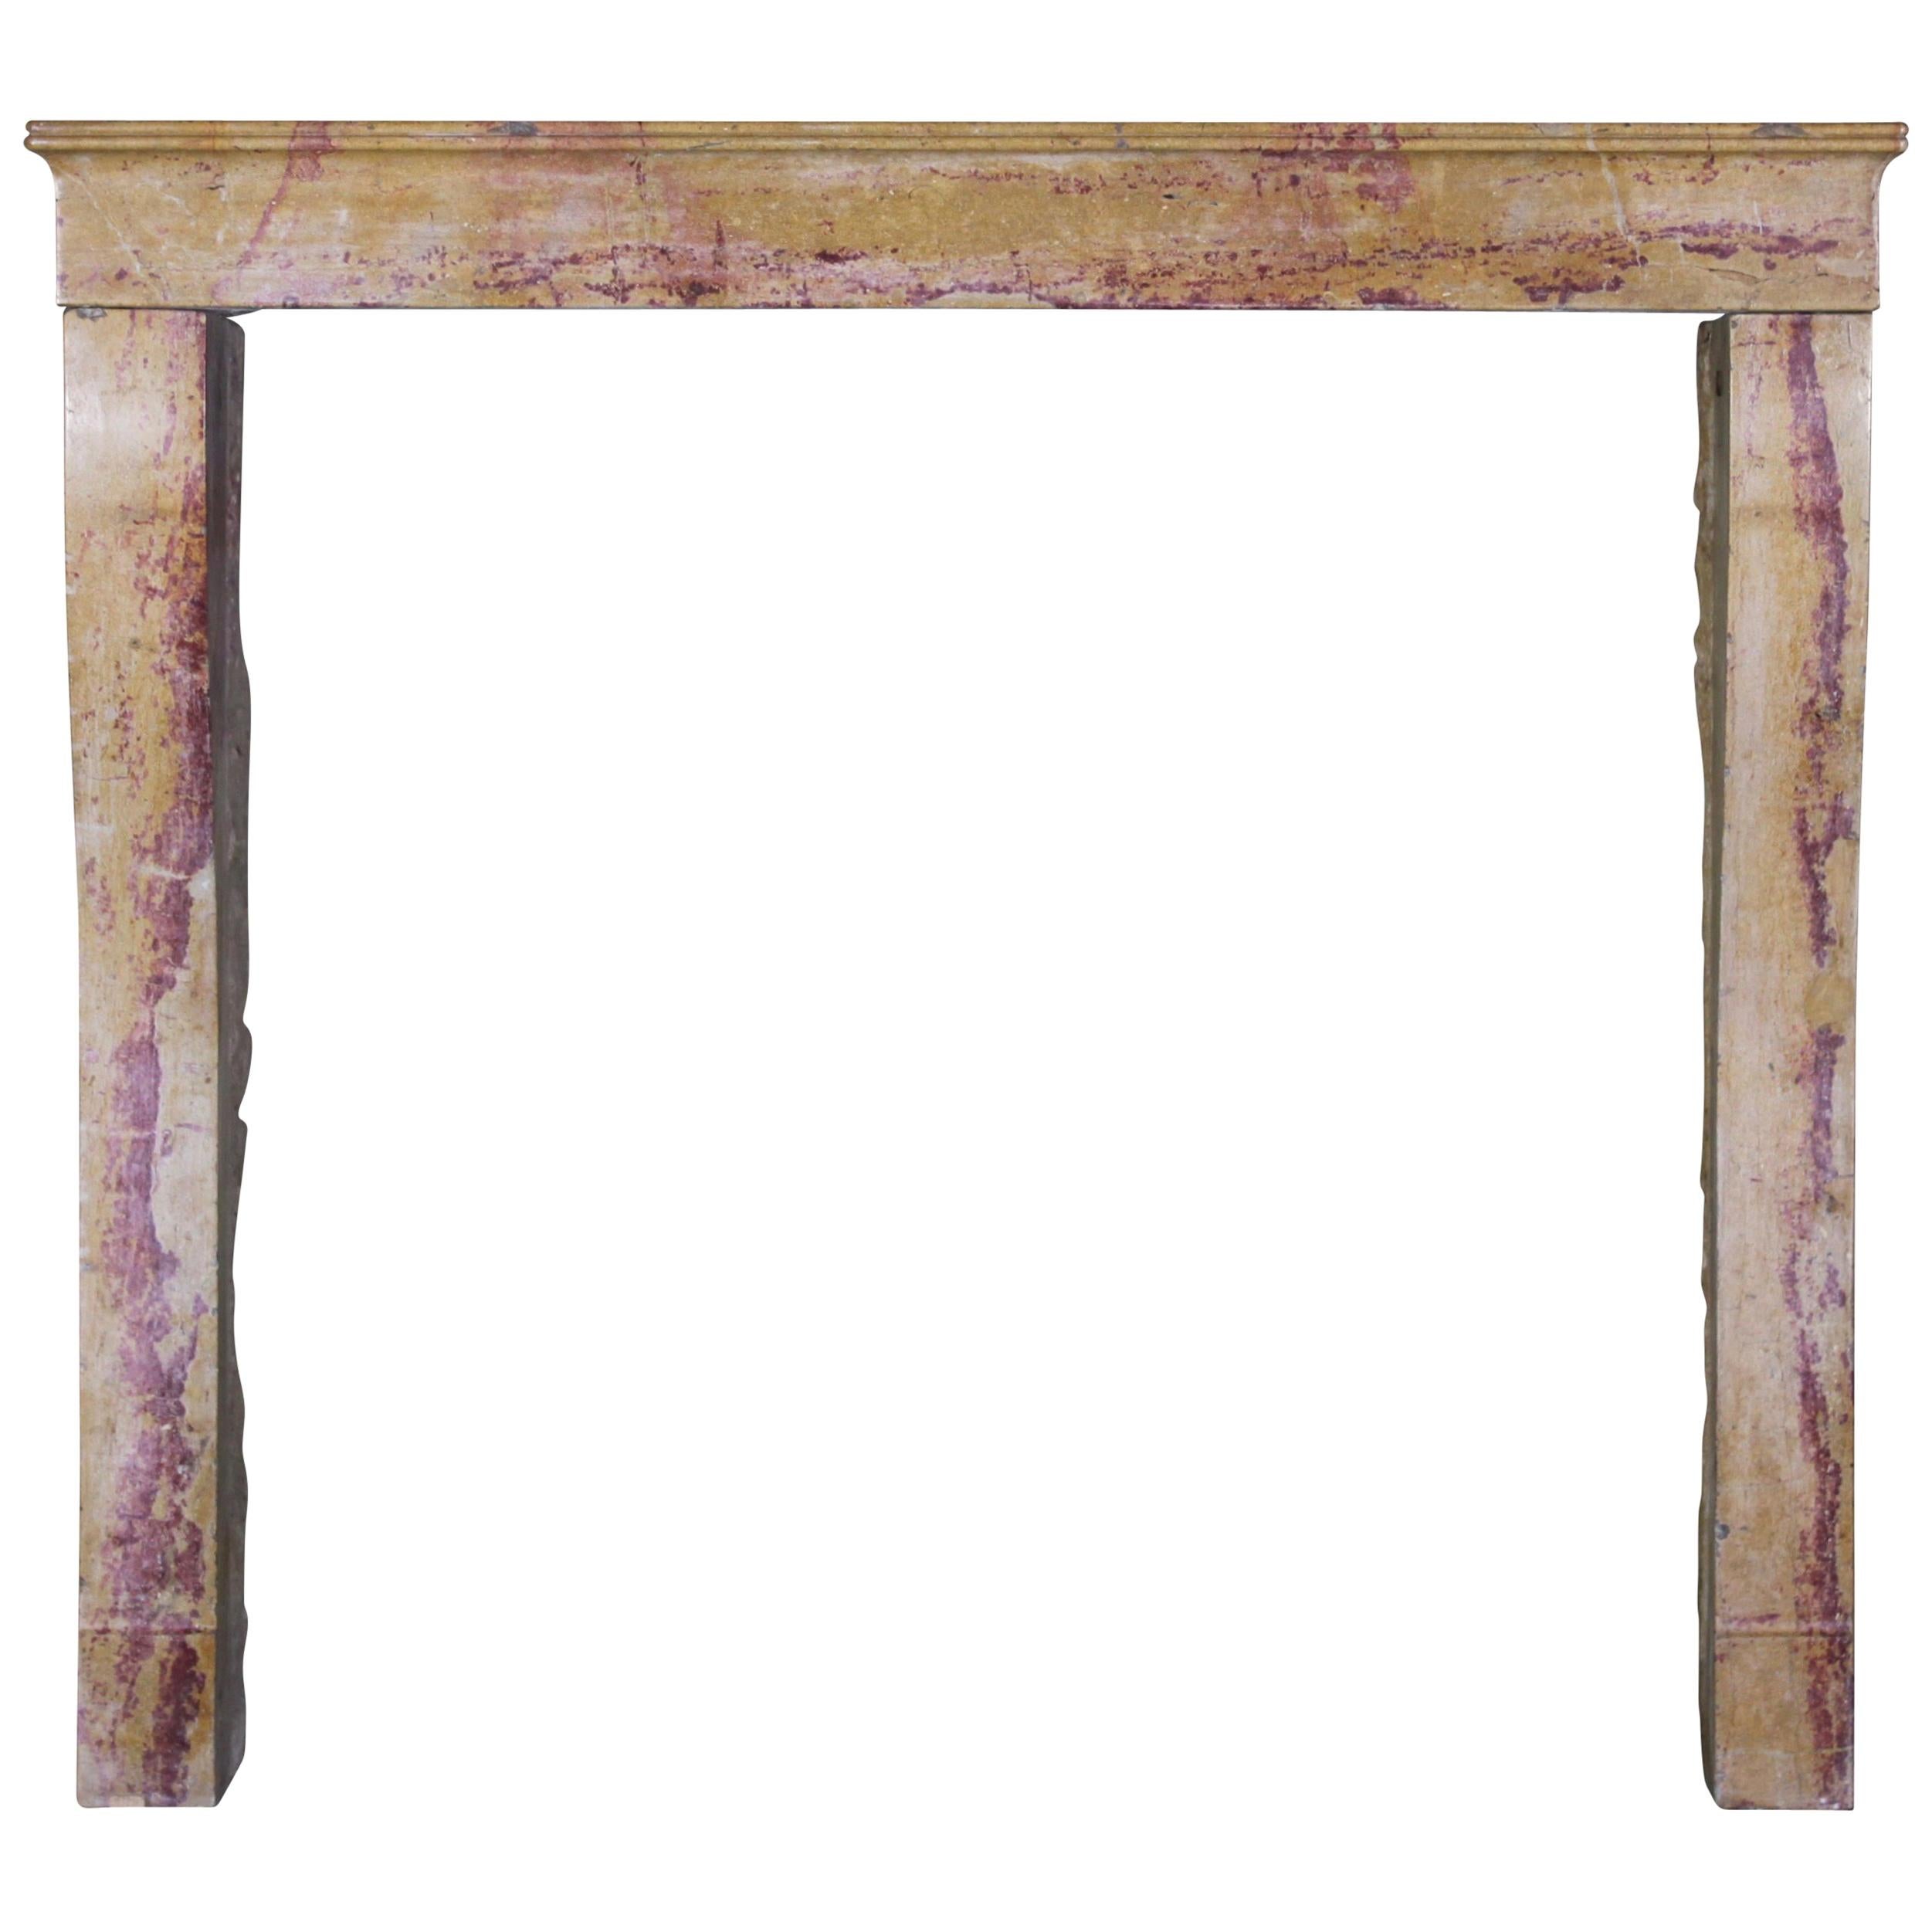 19th Century French Designed by Nature Stone Antique Fireplace Surround For Sale